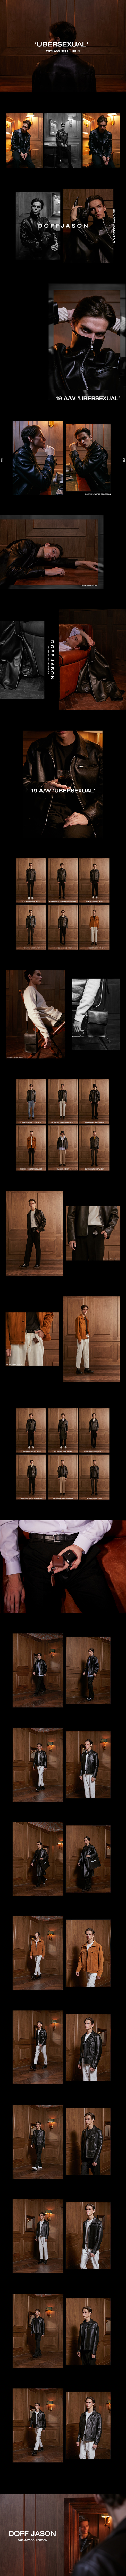 19 A/W COLLECTION